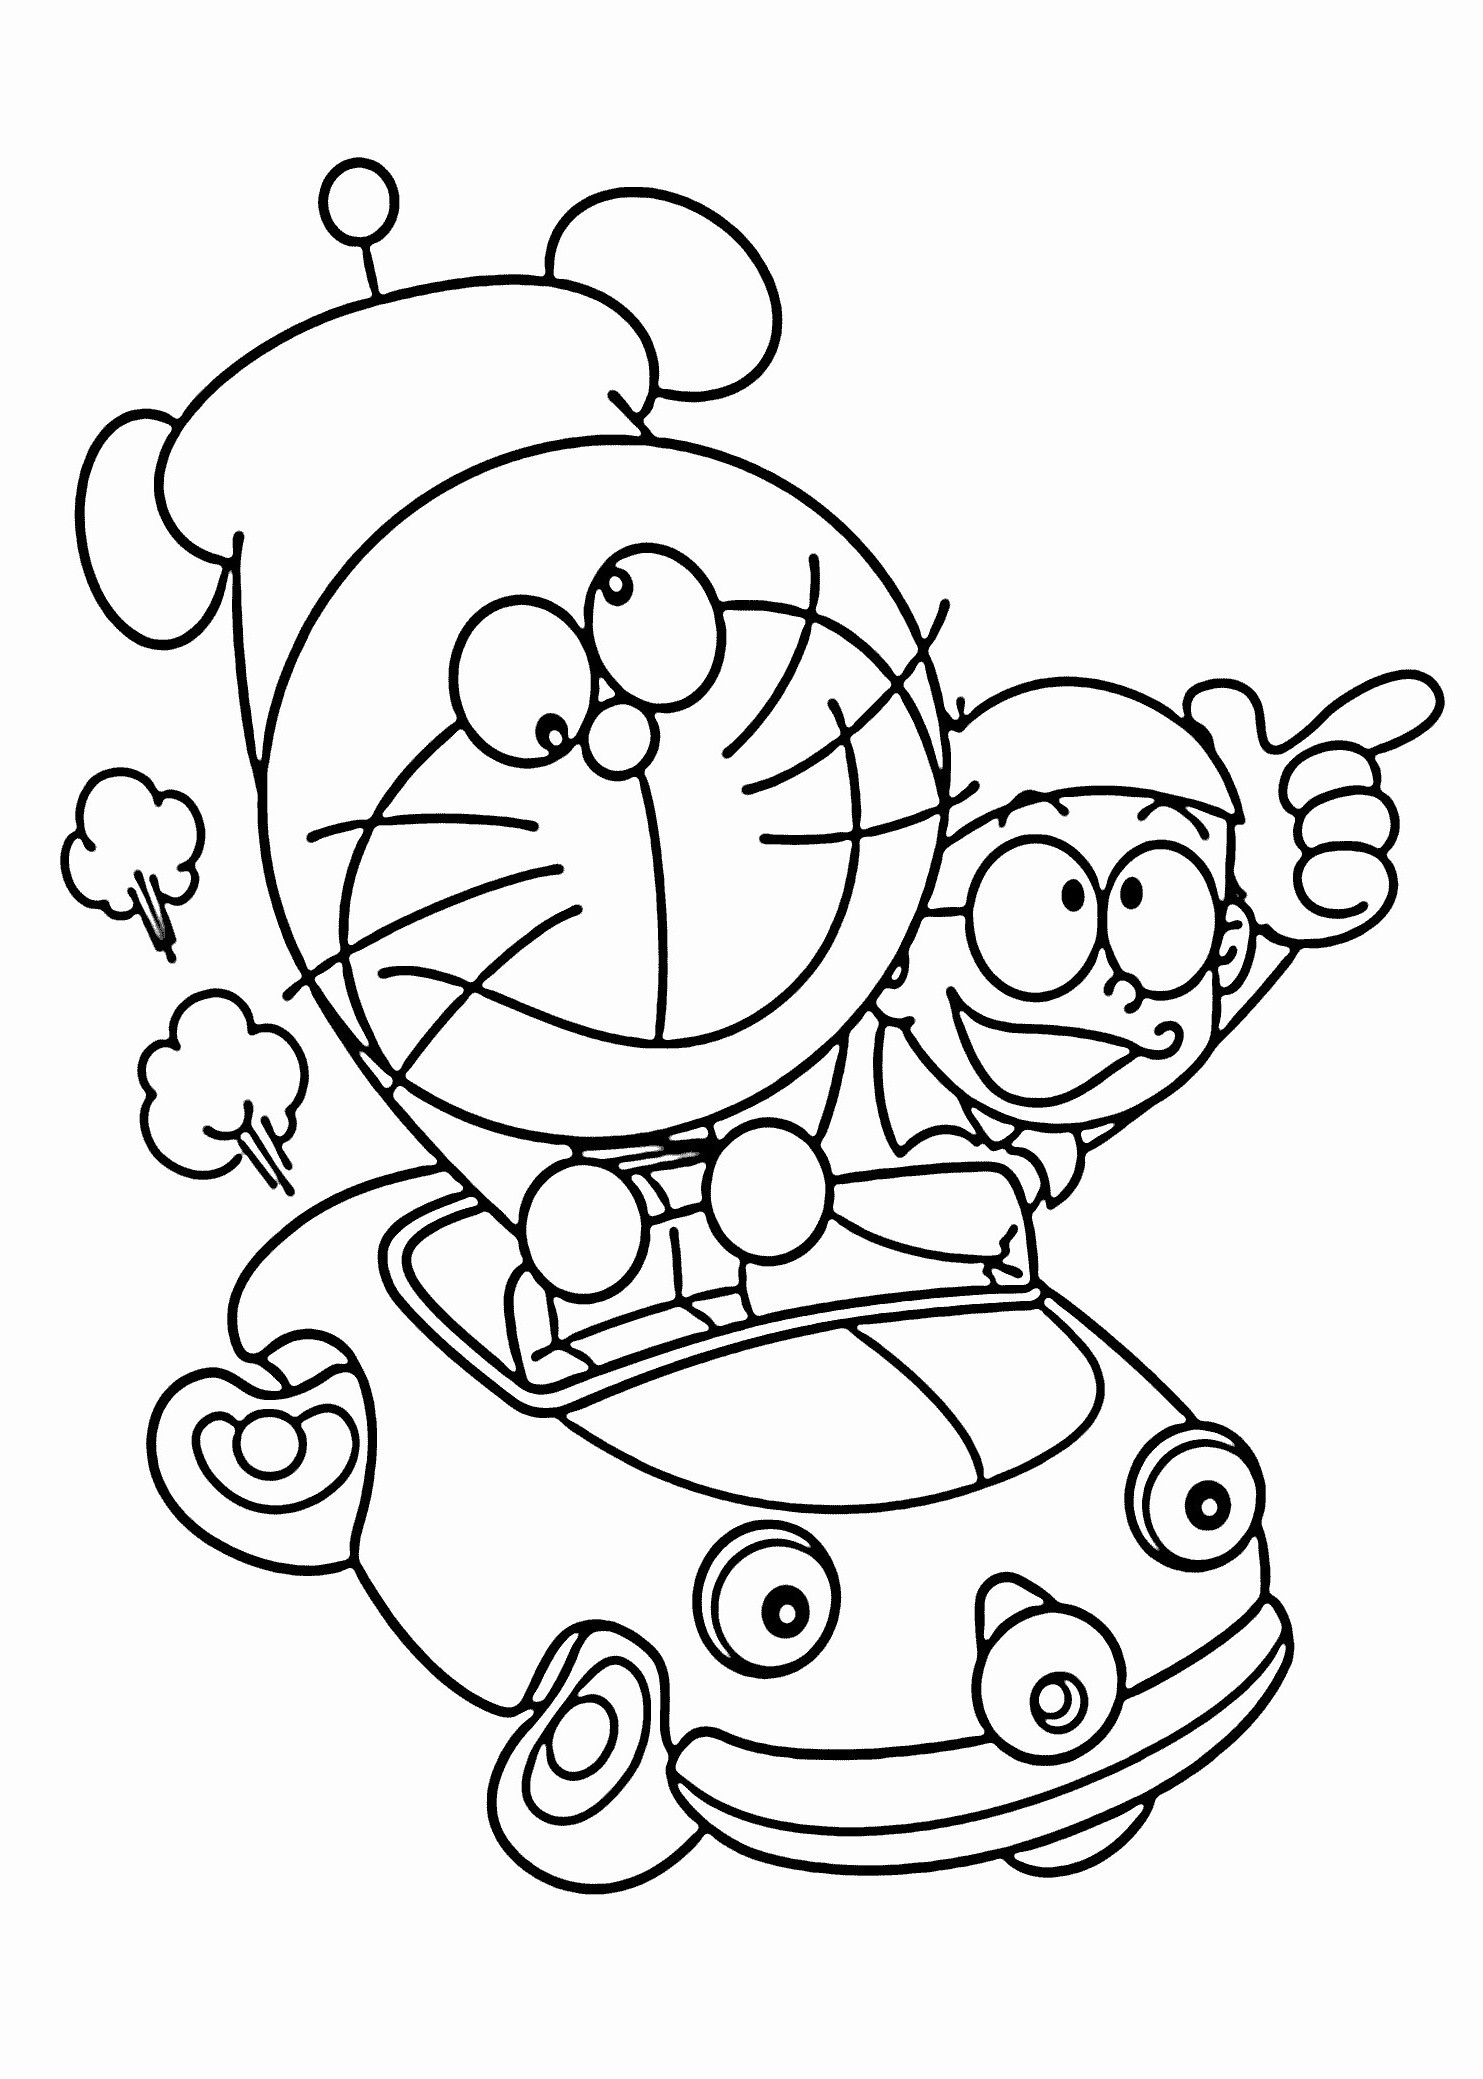 Farm Animals Coloring Pages for Kids